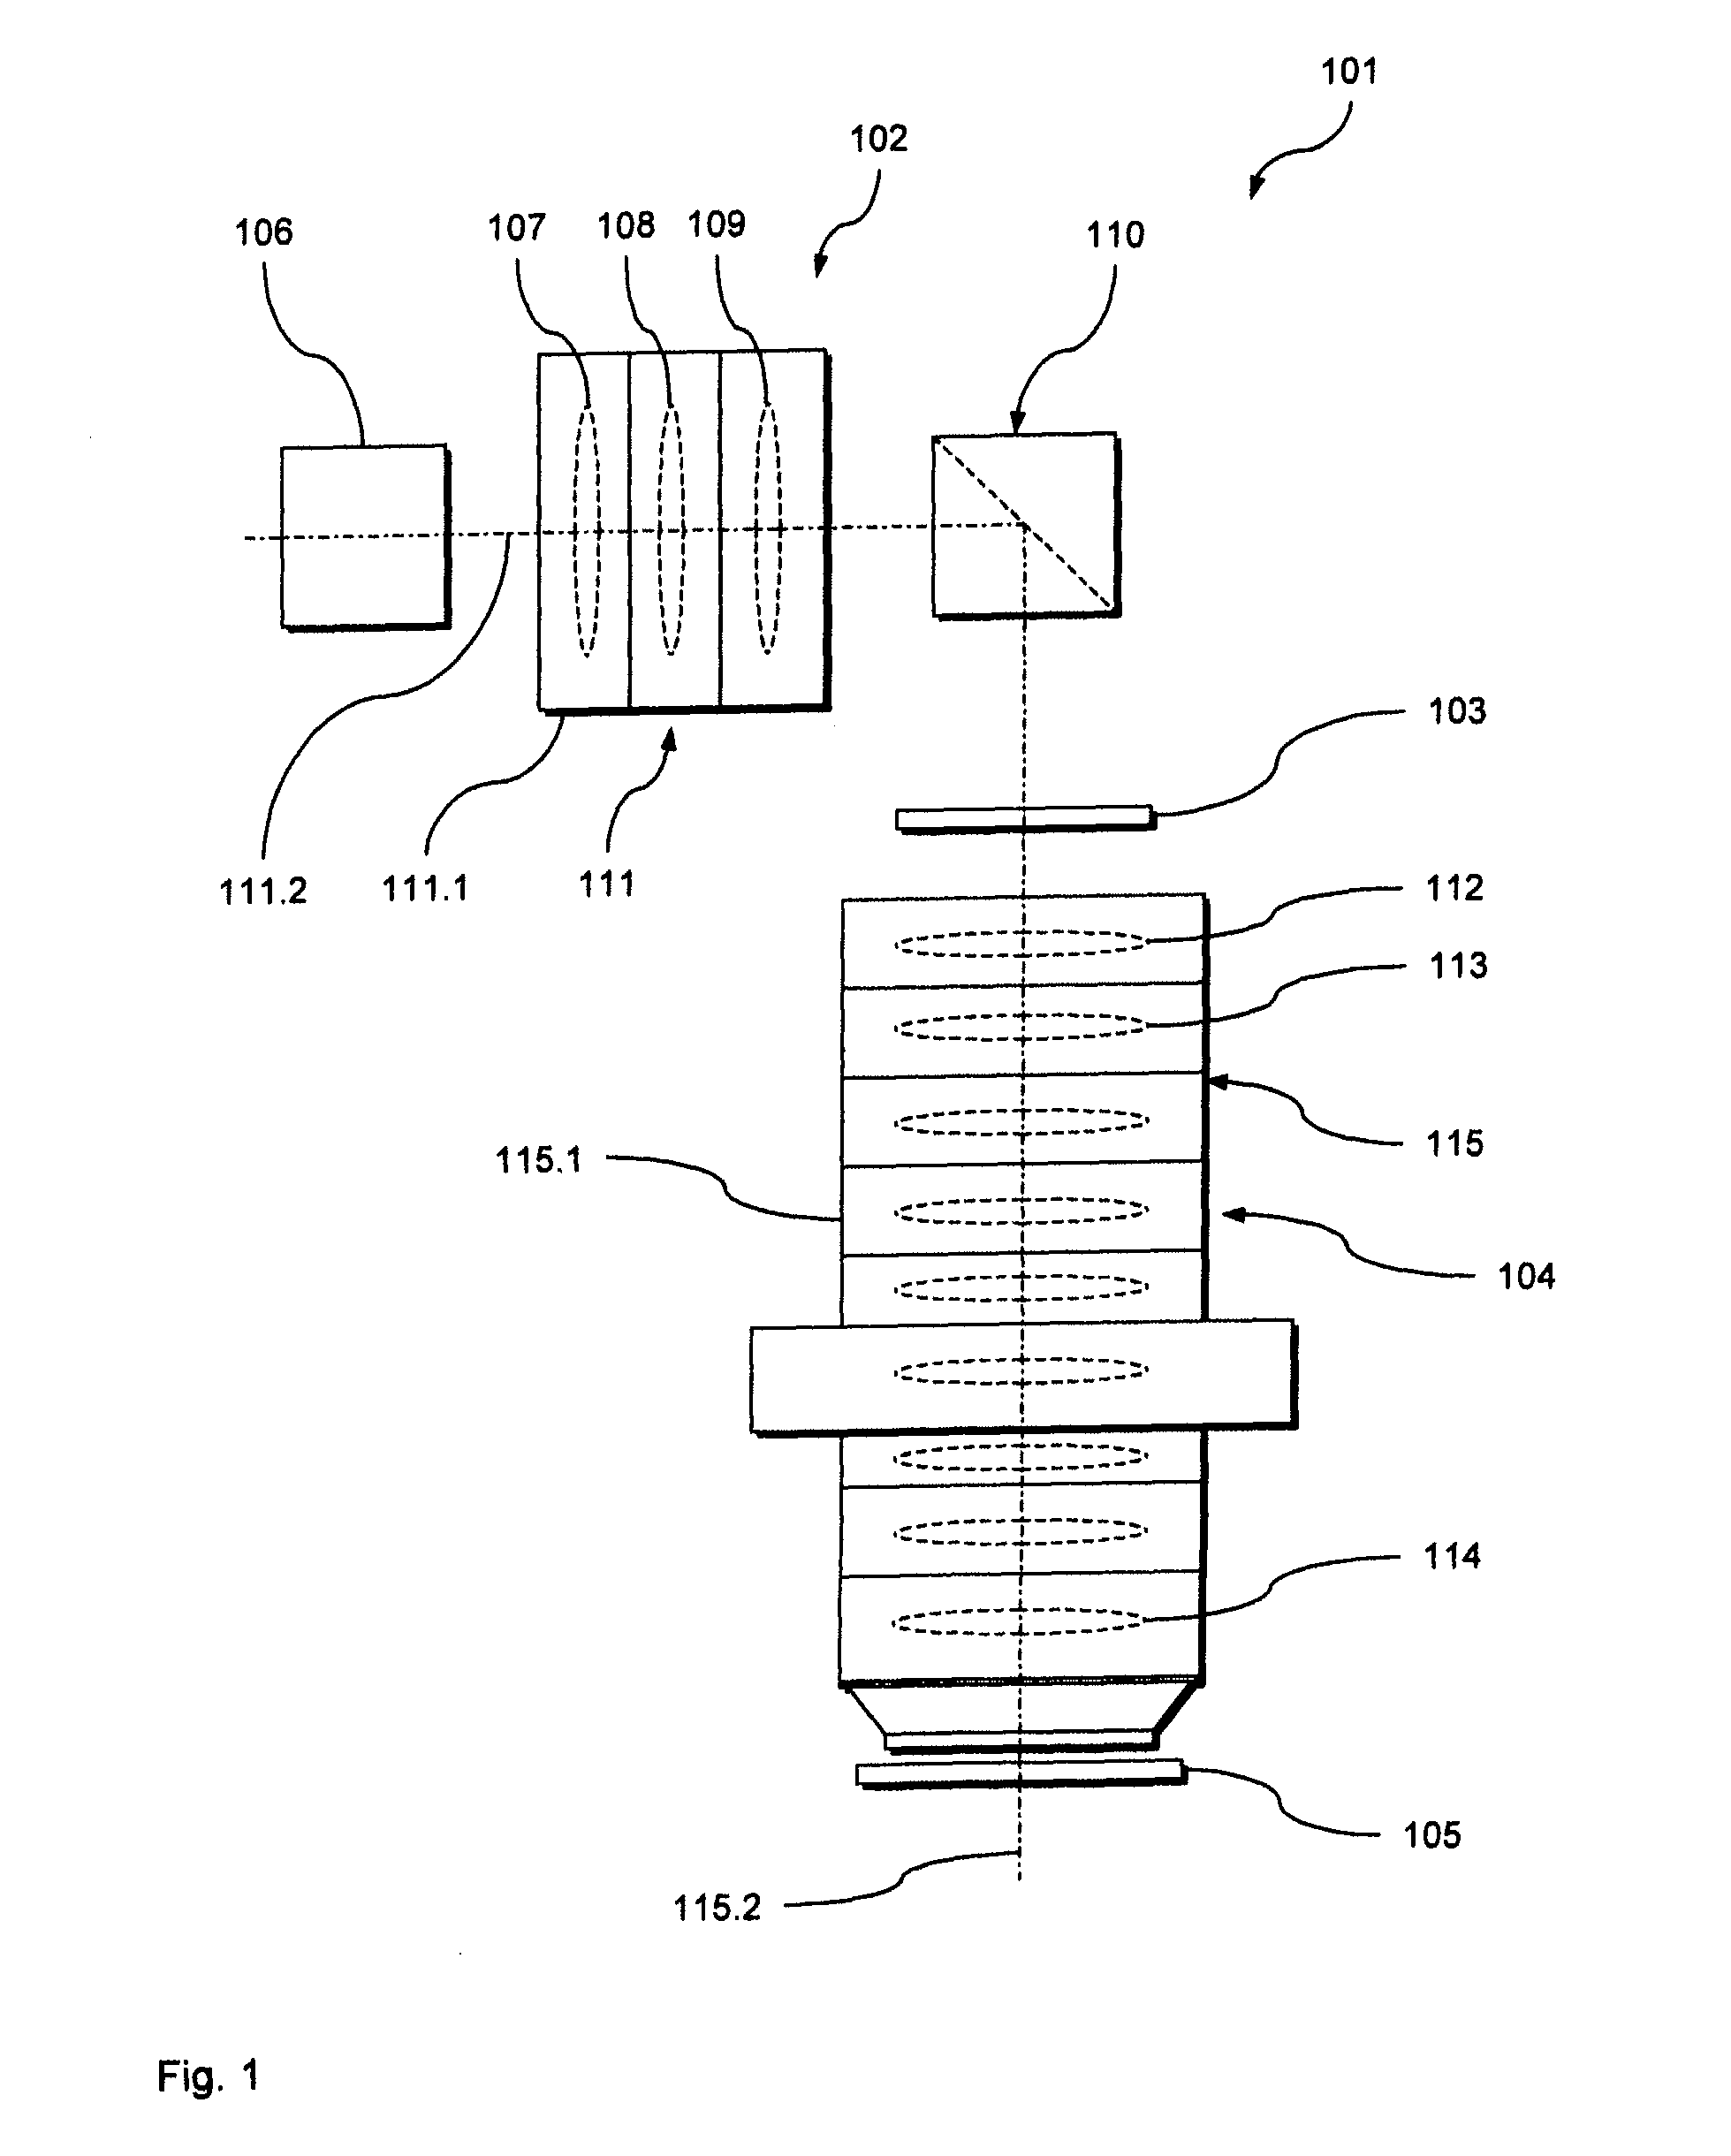 Optical element unit and method of supporting an optical element